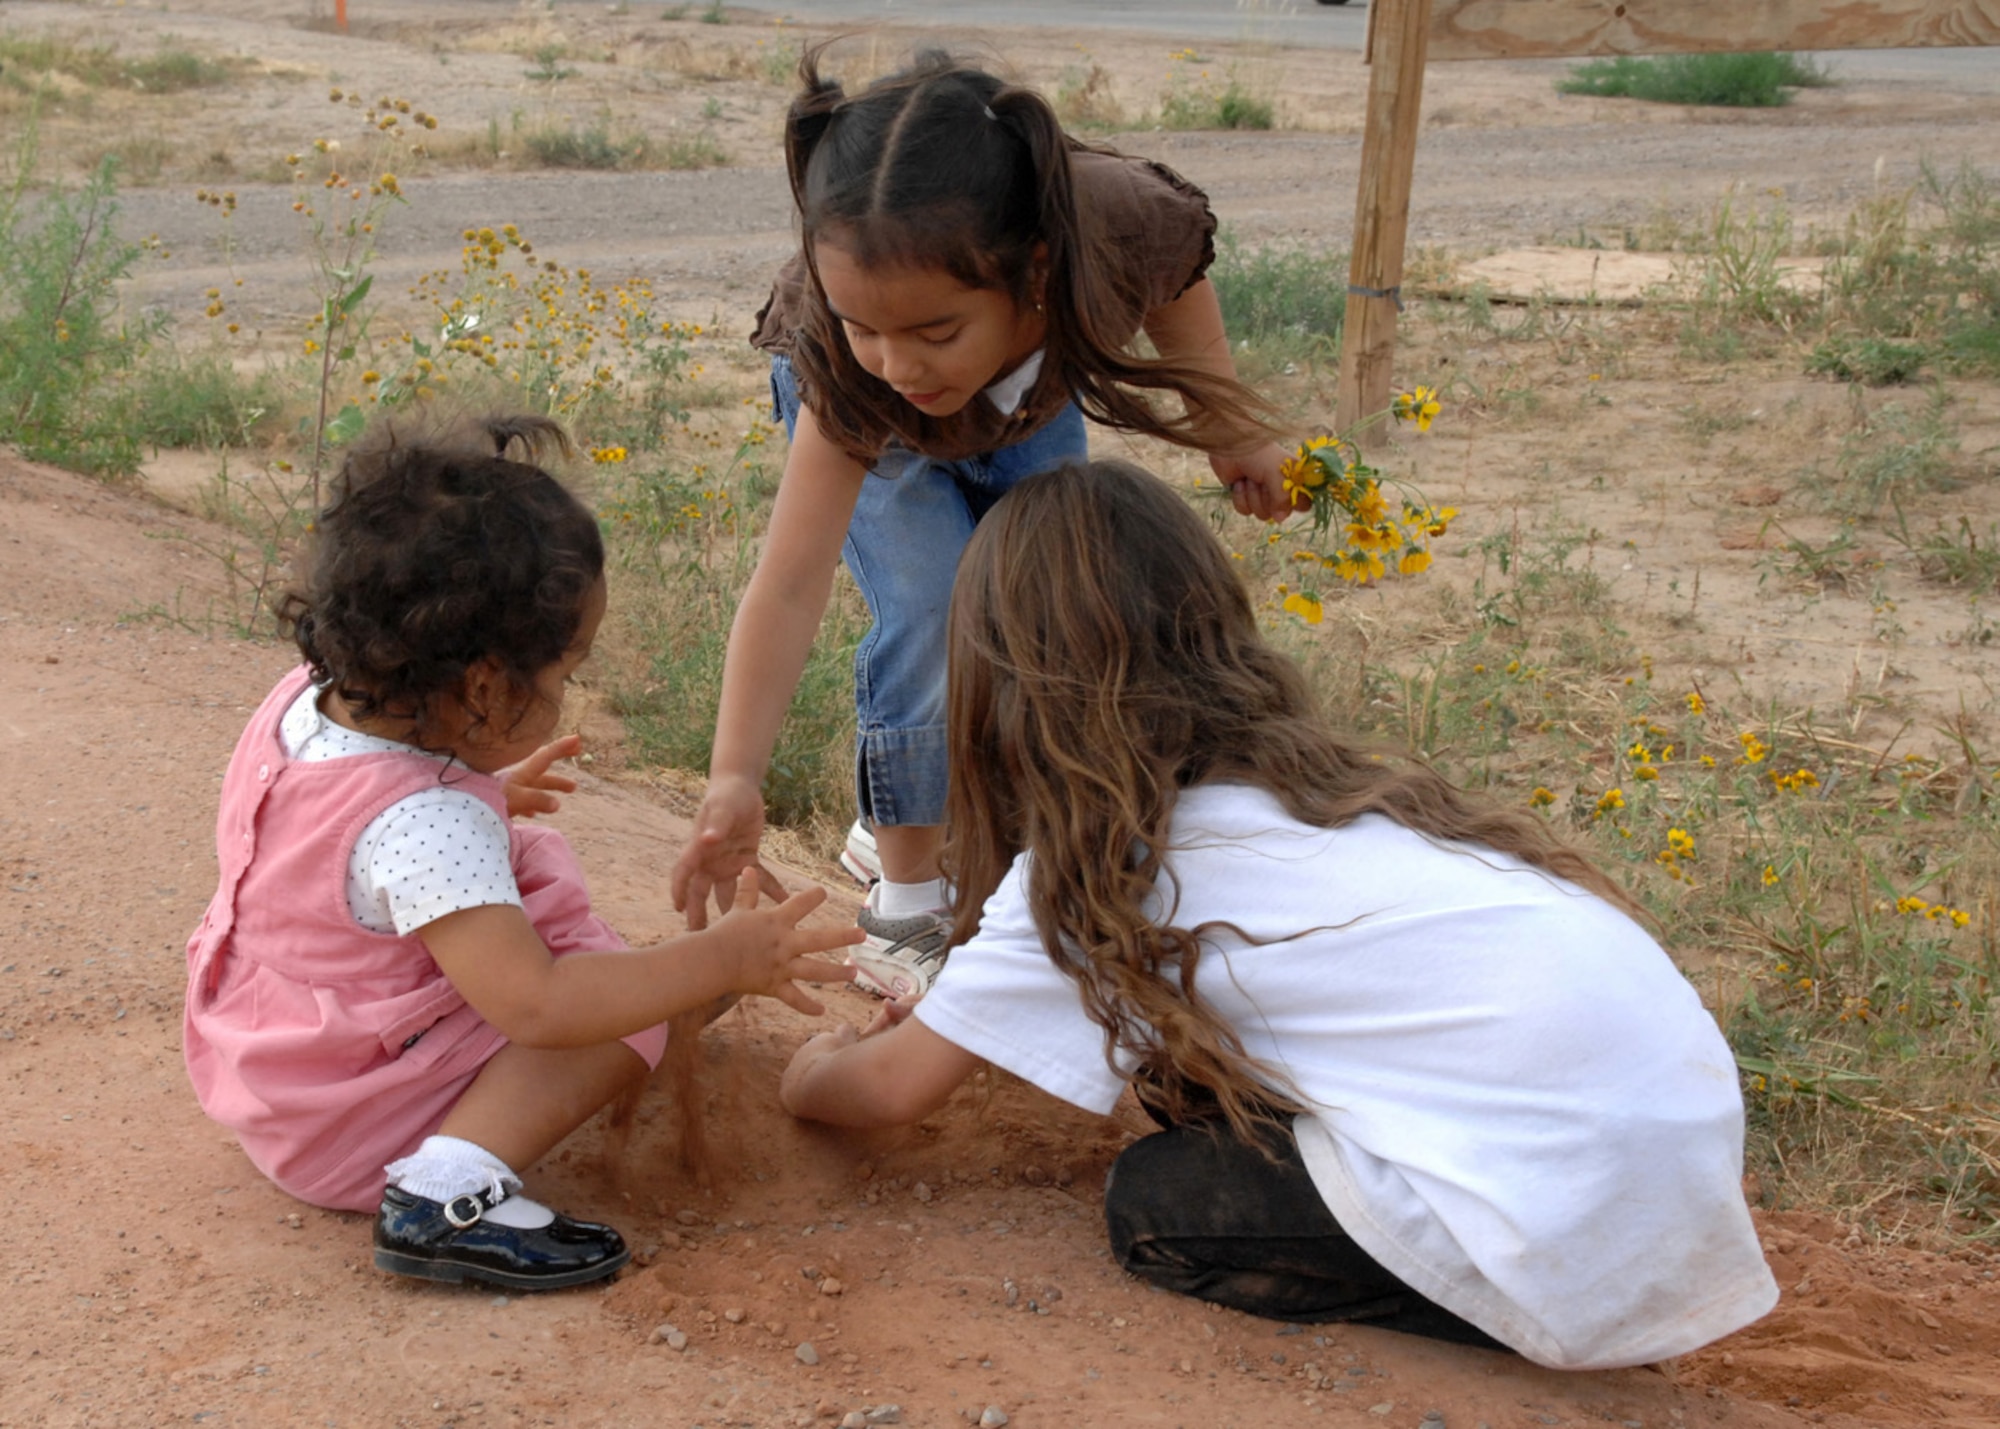 Audryanna Duran and Natalie Iglesias, daughters of Lizabeth Duran, plant yellow flowers with TracyAnn Edwards in Alamorgordo, N.M., October 12. The Duran family came out for the groundbreaking ceremony supported by Habitat for Humanity for the building of their new home. (U.S. Air Force photo/Airman 1st Class Veronica Salgado)